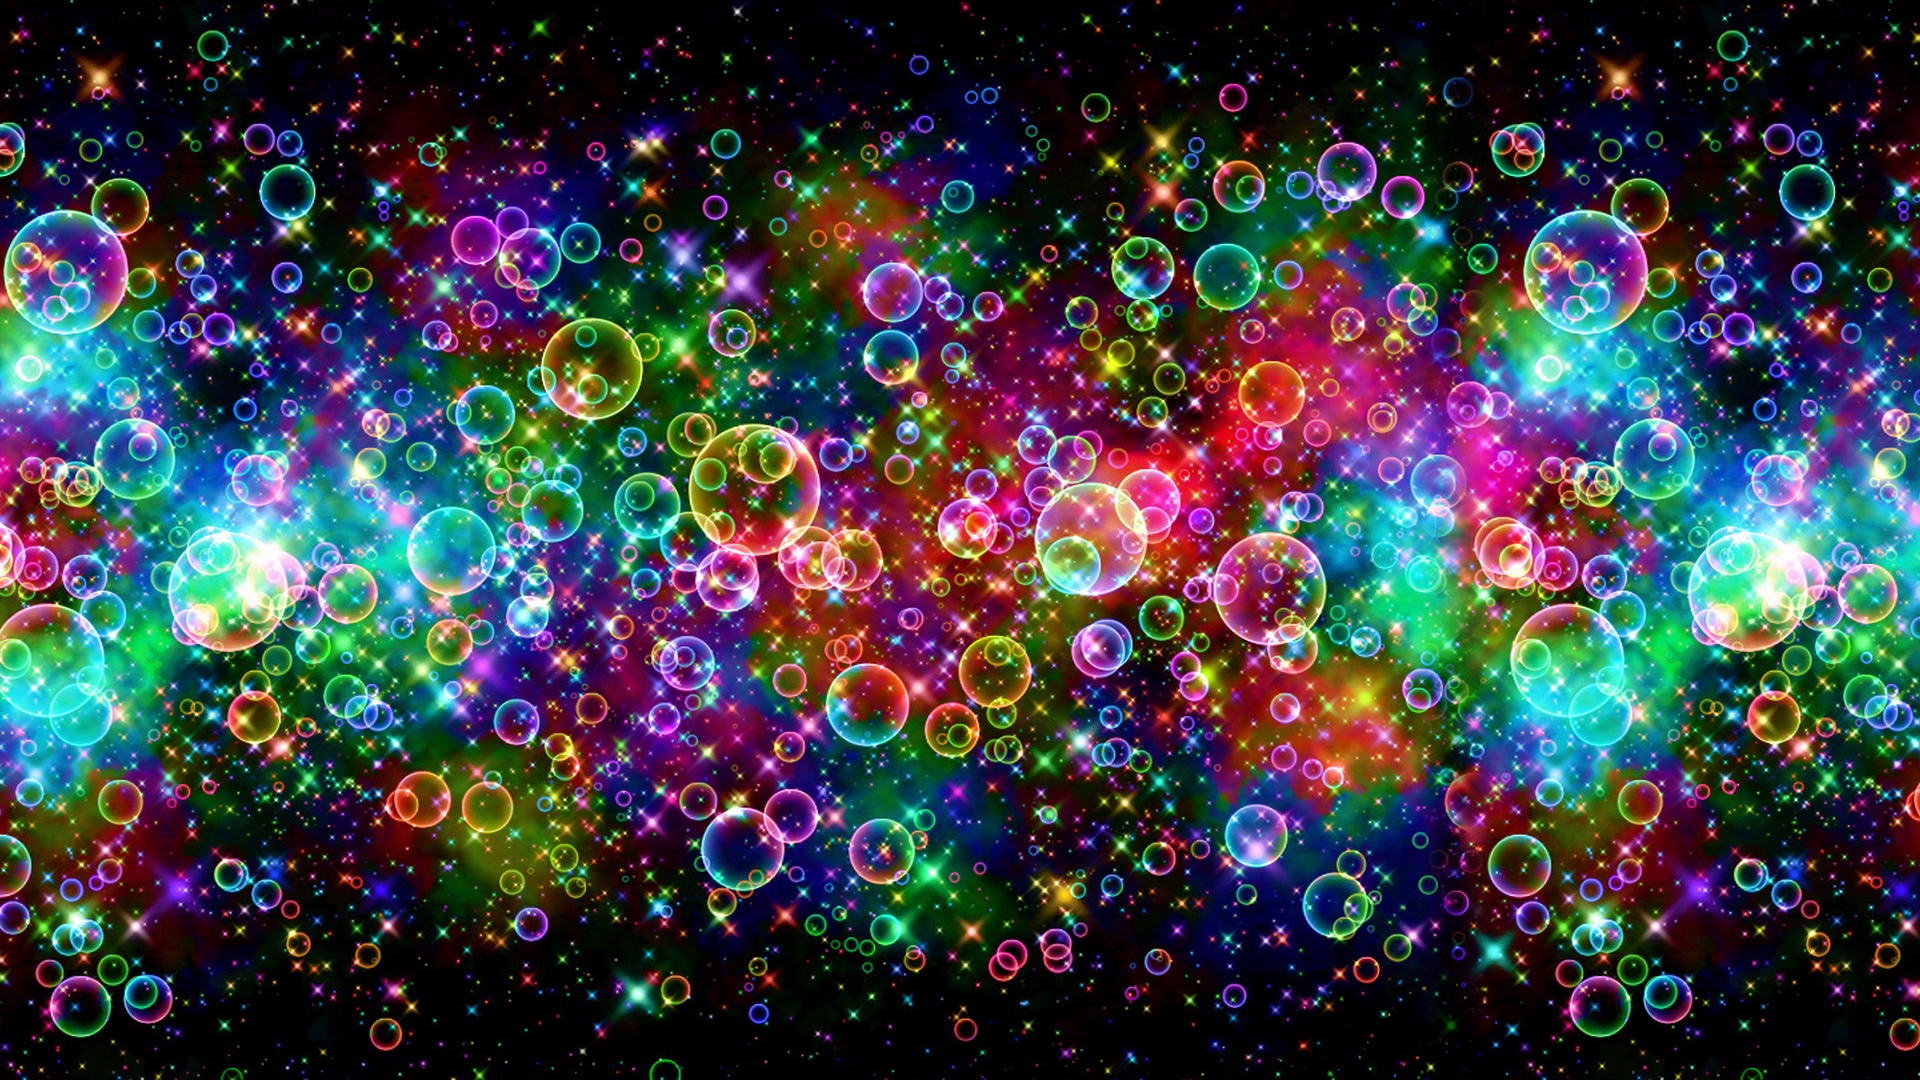 Colorful Bubbles for 1920 x 1080 HDTV 1080p resolution